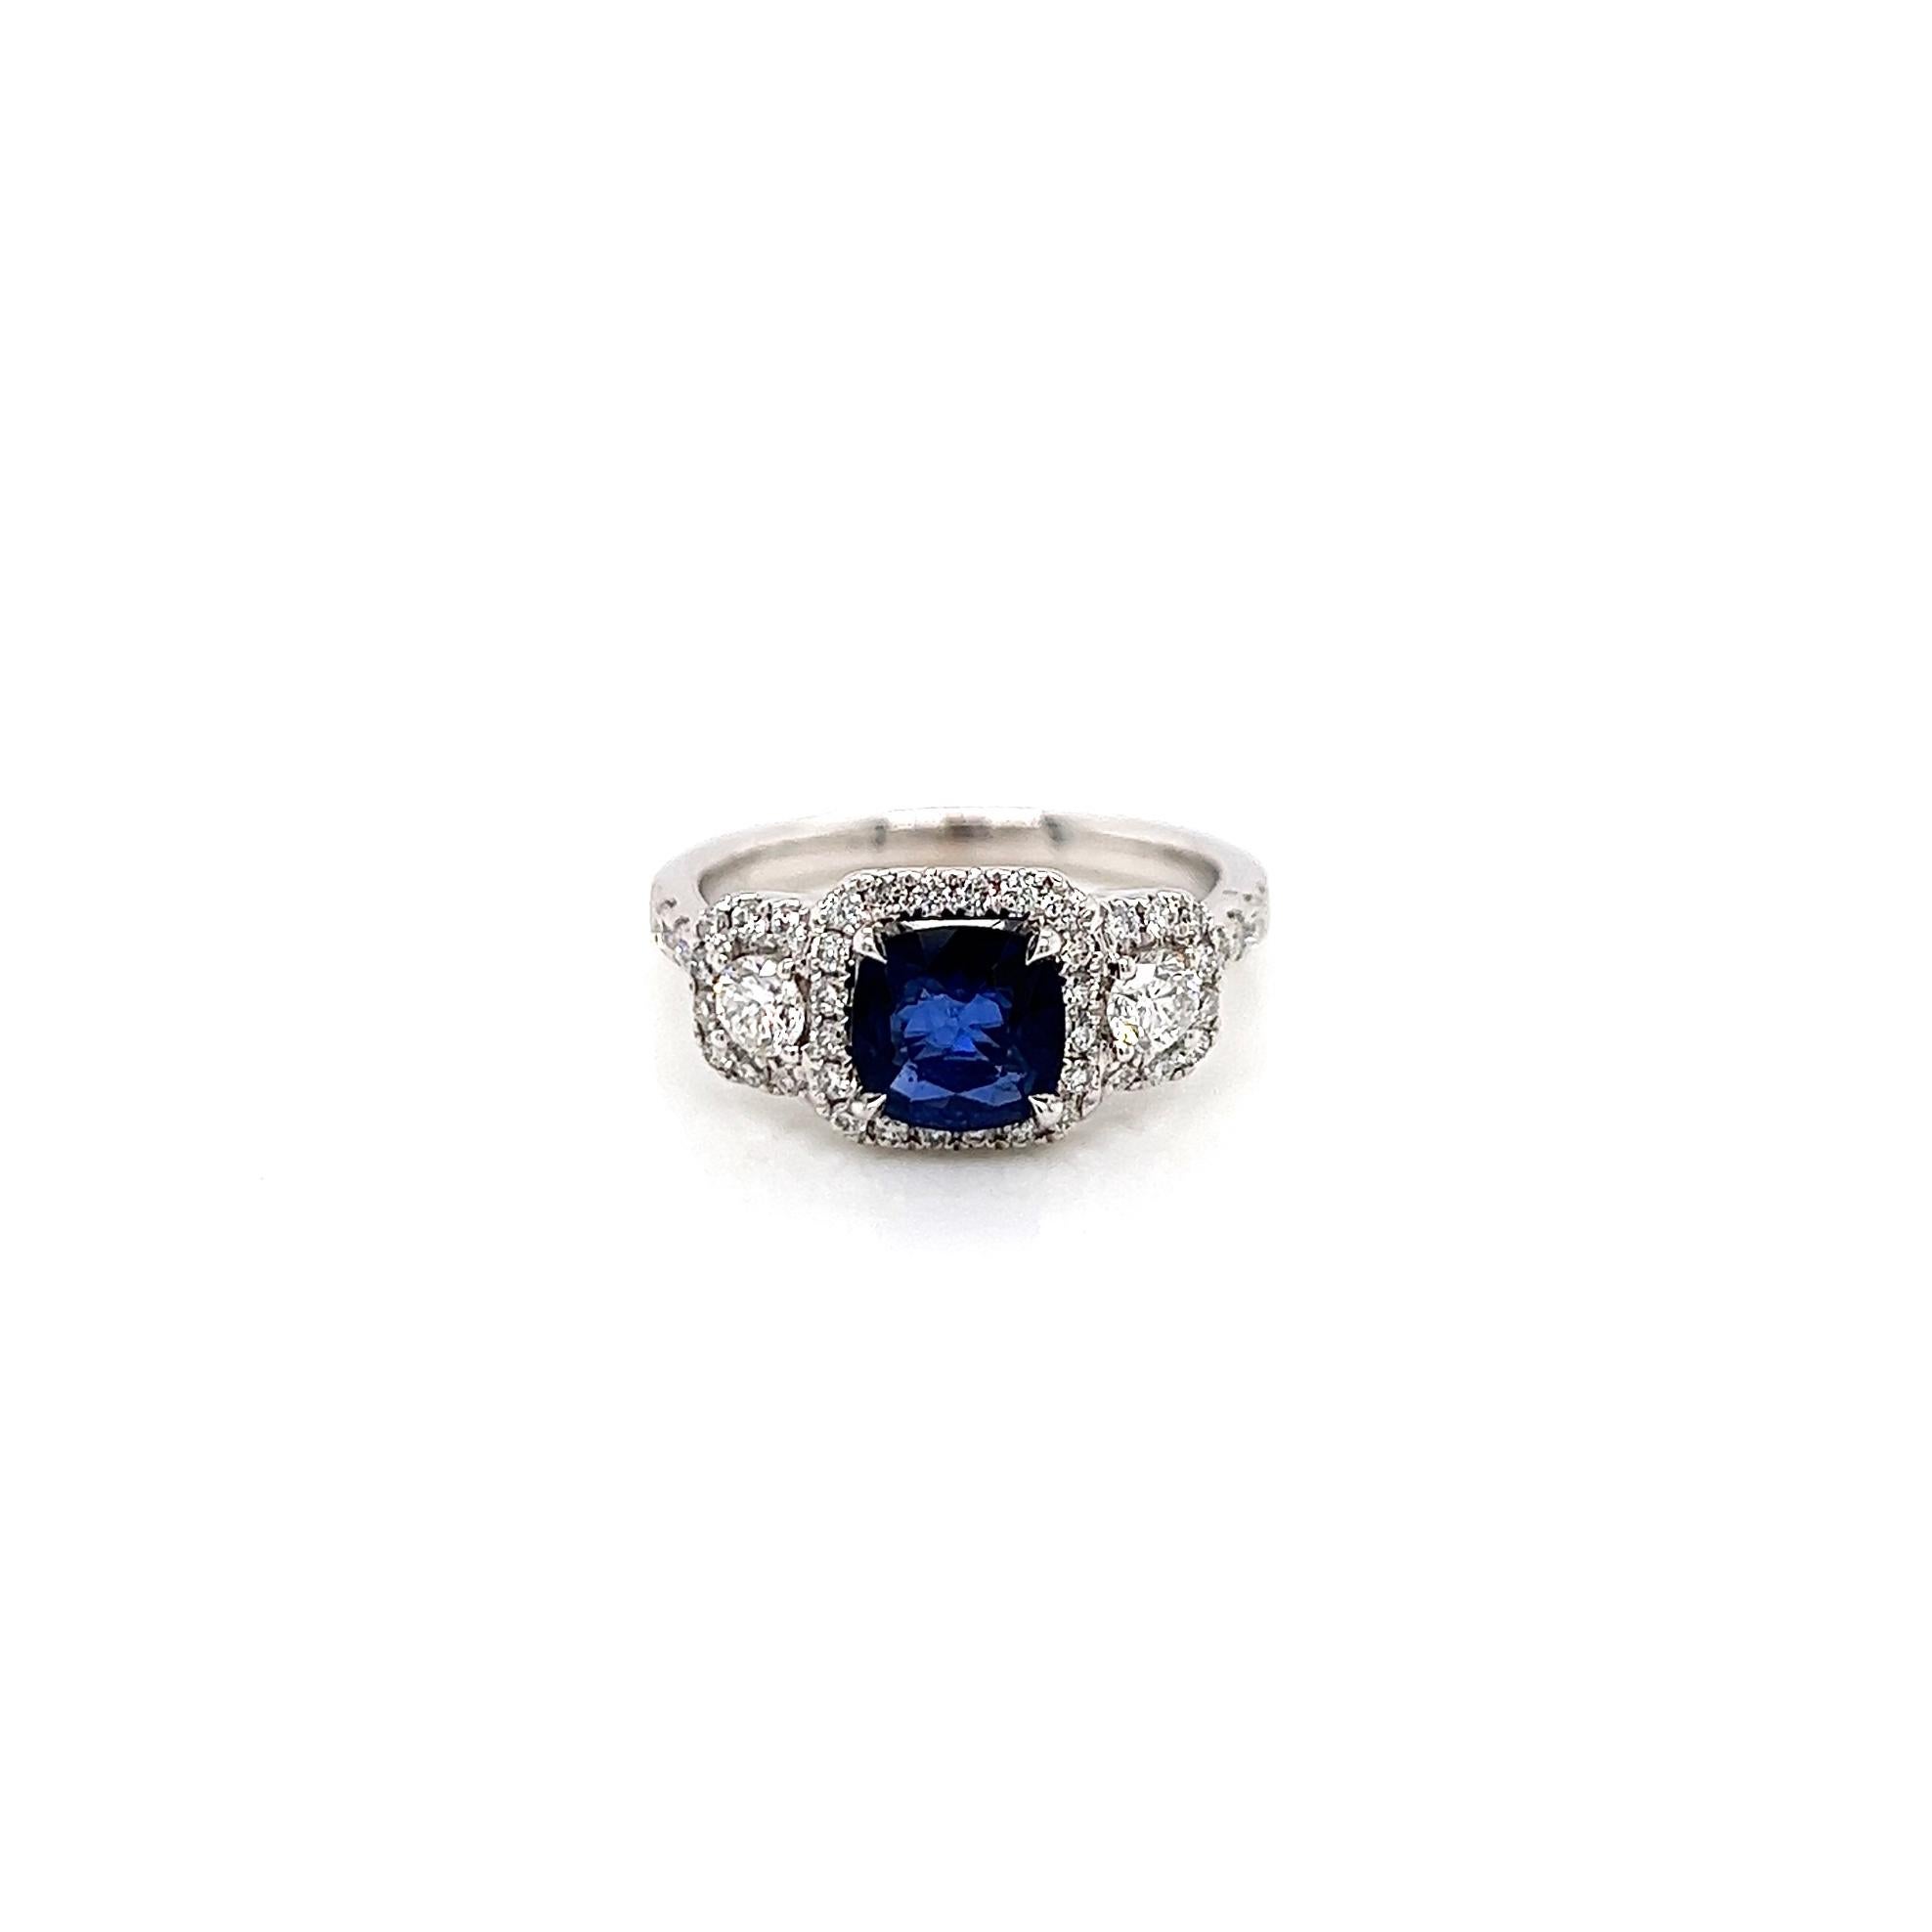 2.02 Total Carat Sapphire Diamond Engagement Ring

-Metal Type: 18K White Gold
-1.24 Carat Cushion Cut Blue Sapphire
-0.78 Carat Round Side Natural Diamonds, F-G Color, VS-SI Clarity
-Size 6.75

Made in New York City